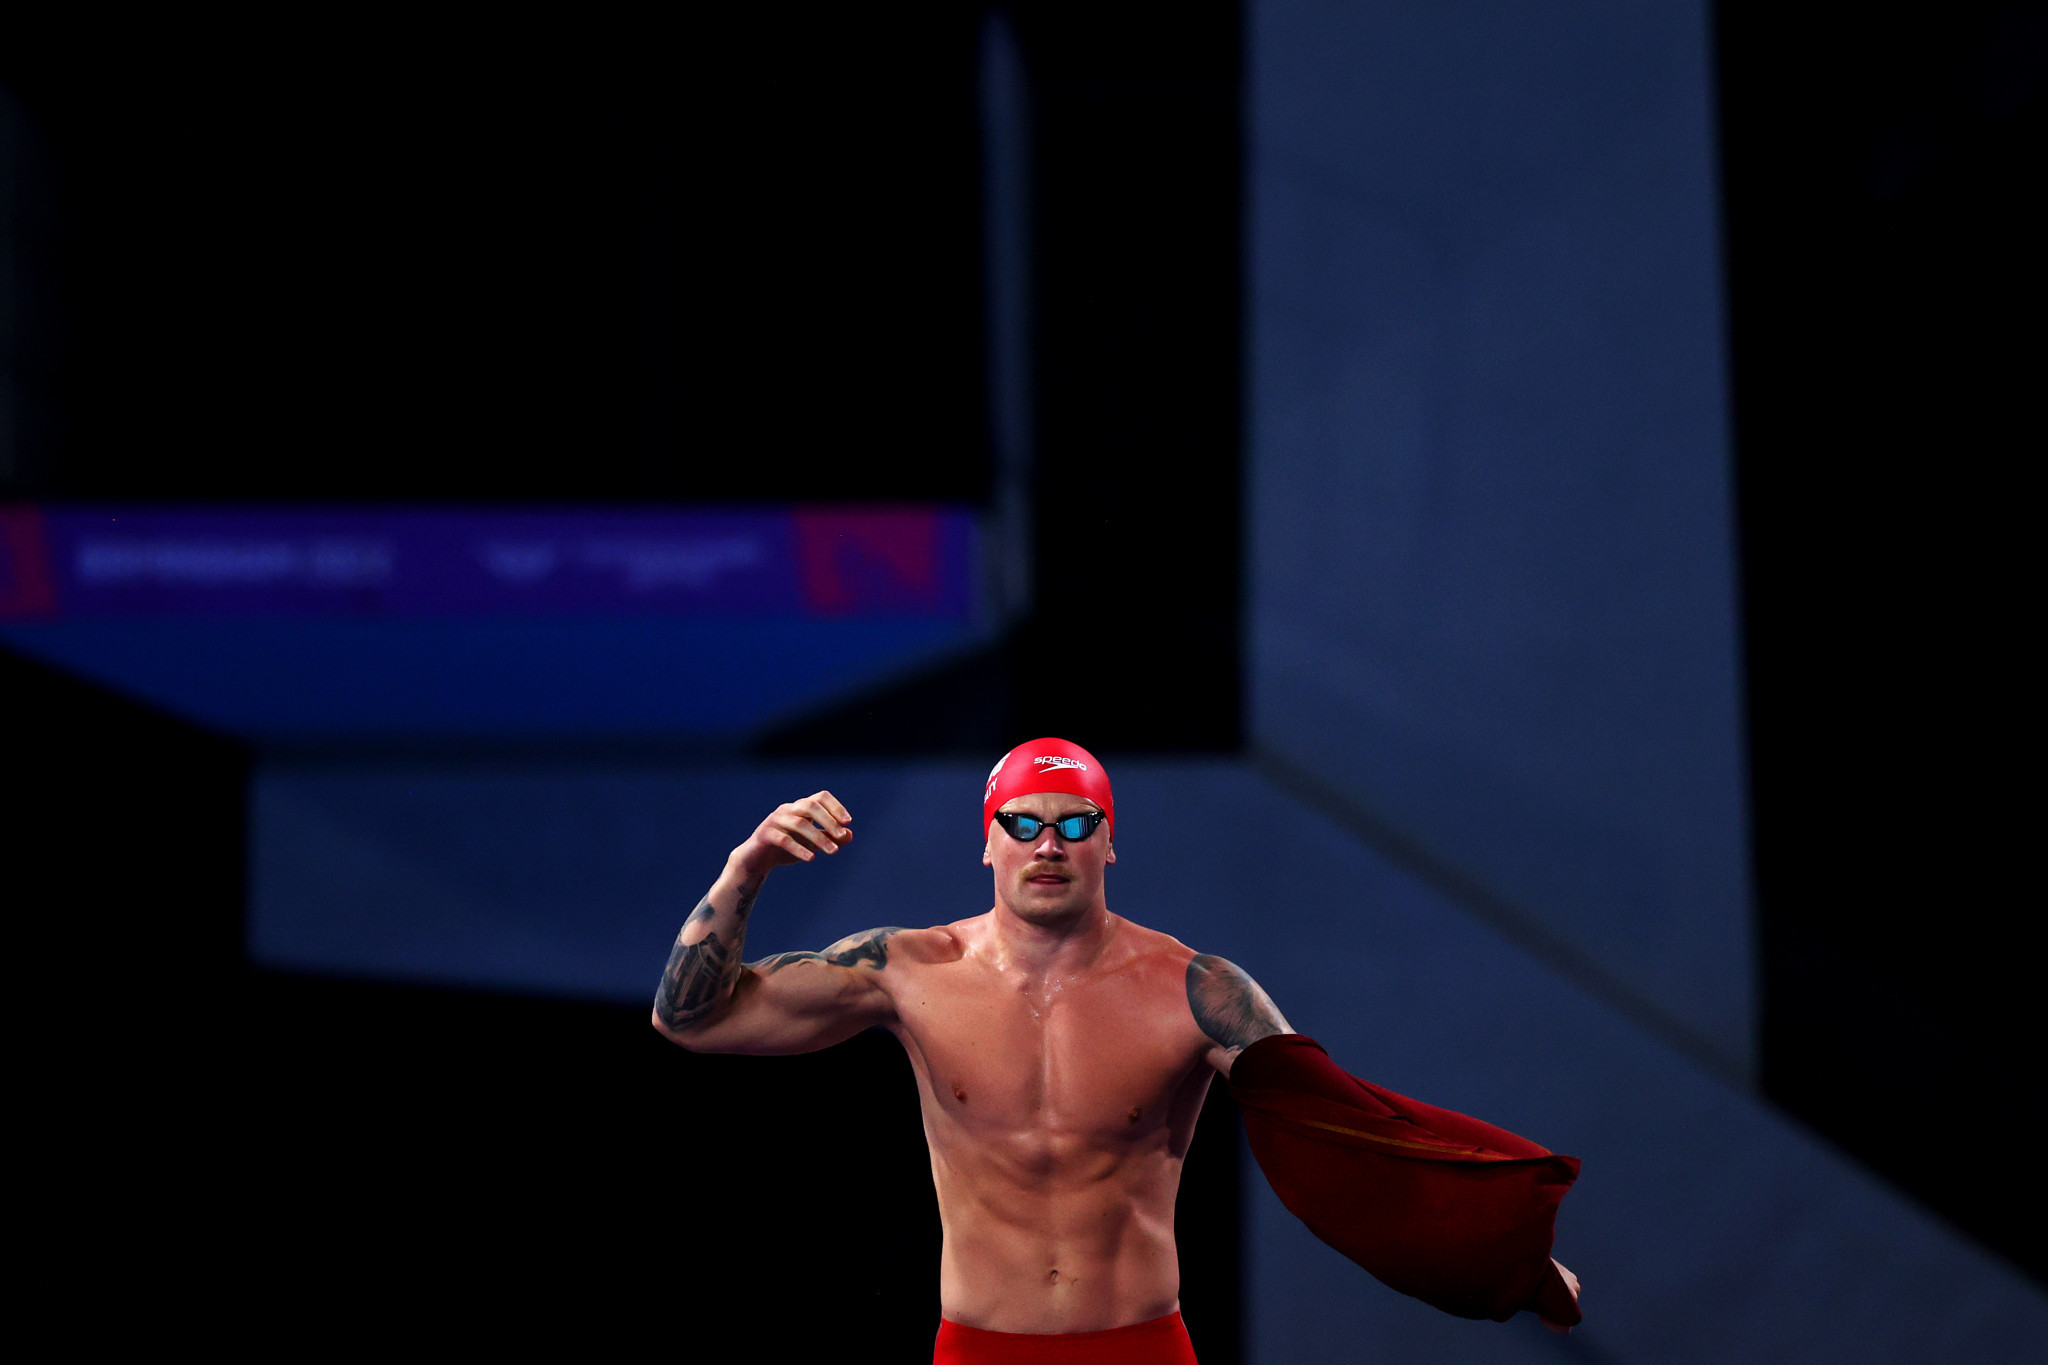 Adam Peaty finished fourth in the men's 100m breaststroke just two months after breaking his foot ©Getty Images